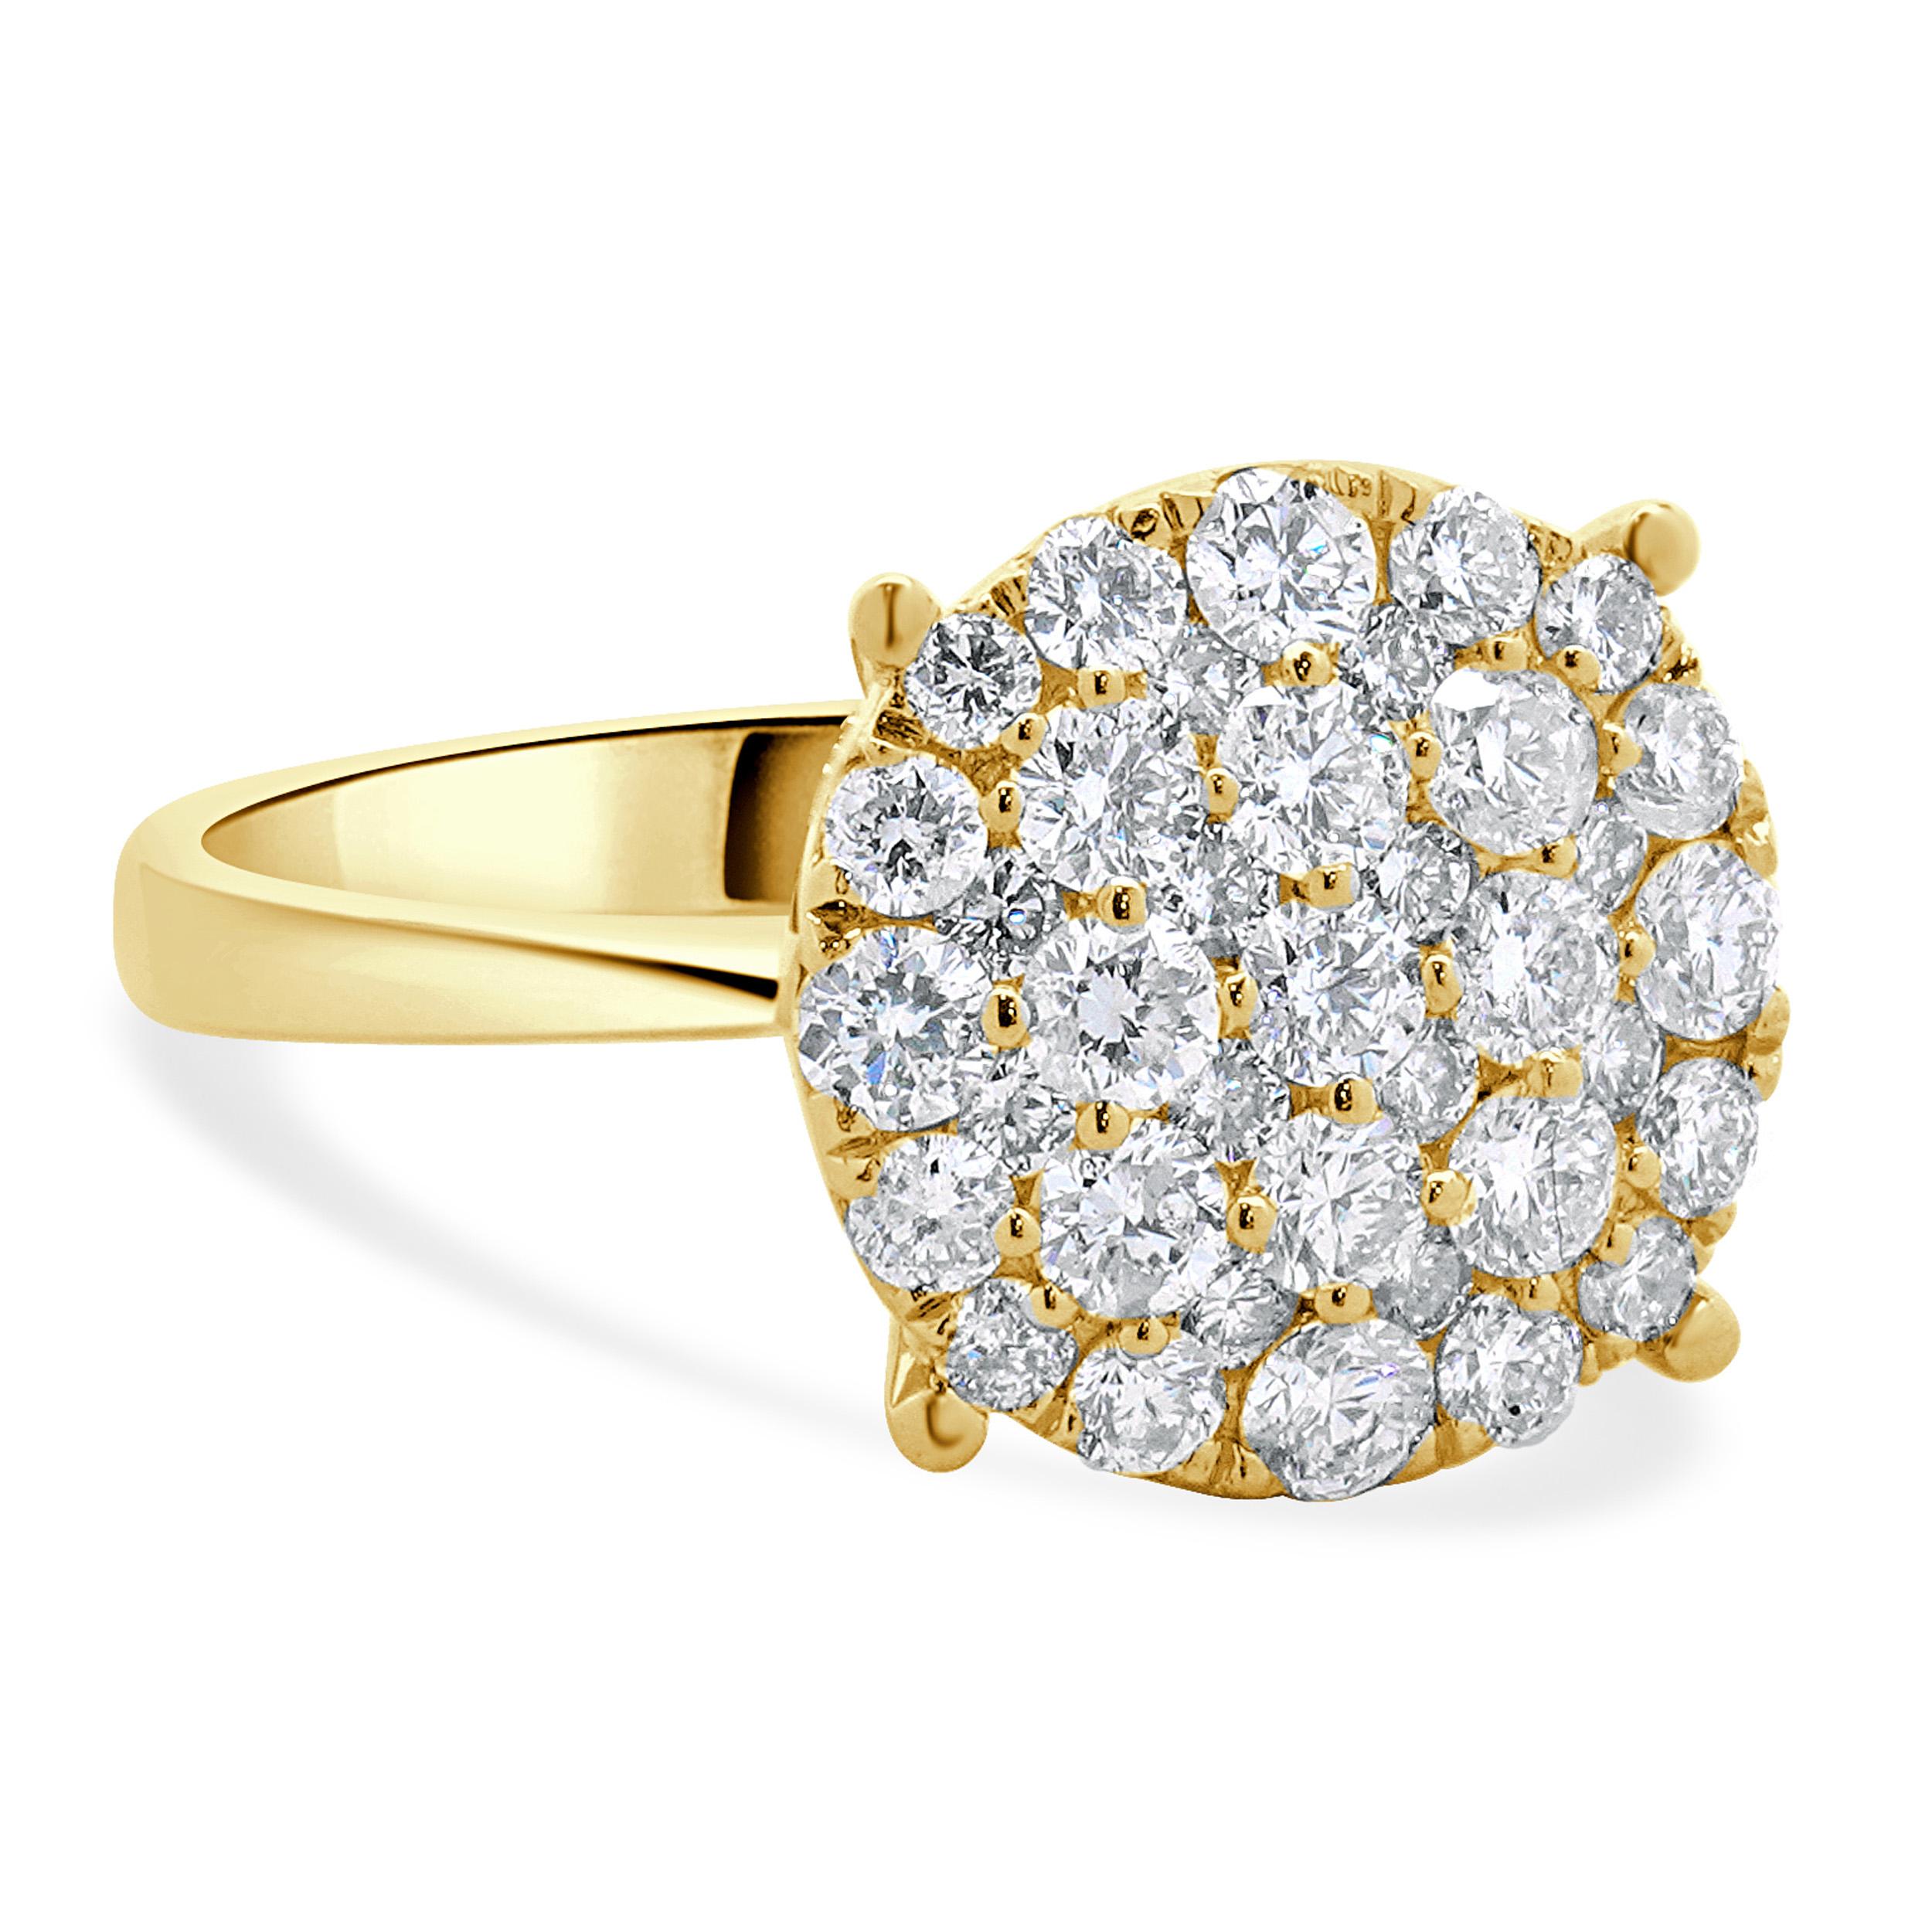 14 Karat Yellow Gold Diamond Cluster Engagement Ring In Excellent Condition For Sale In Scottsdale, AZ